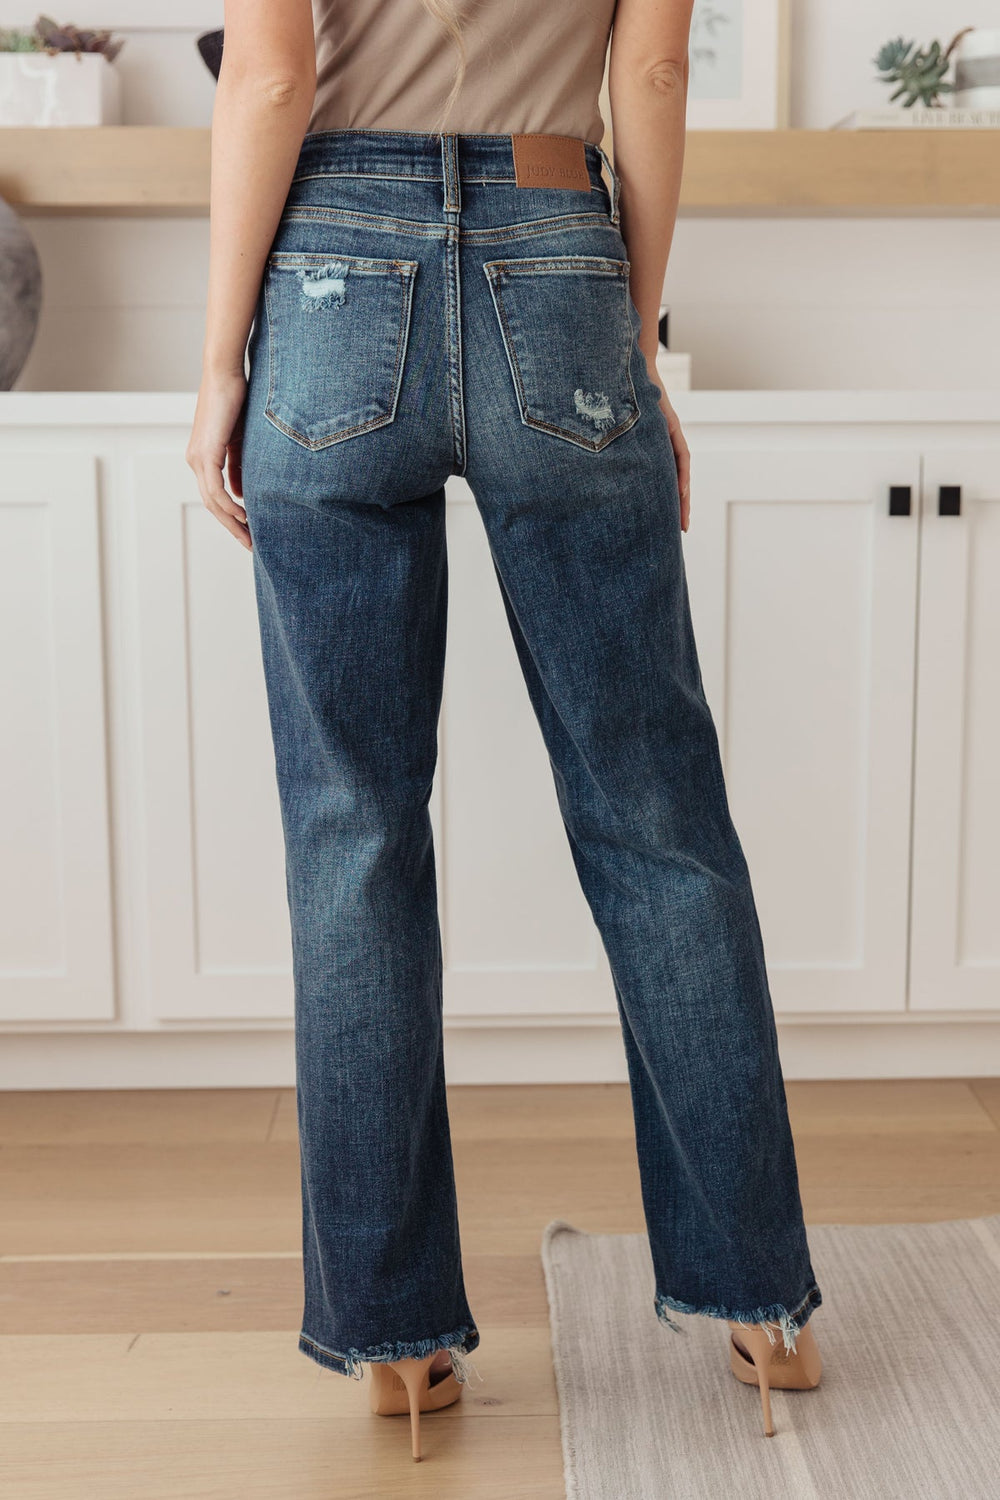 Judy Blue - High Rise 90's Straight Jeans - Dark Wash - Inspired Eye Boutique